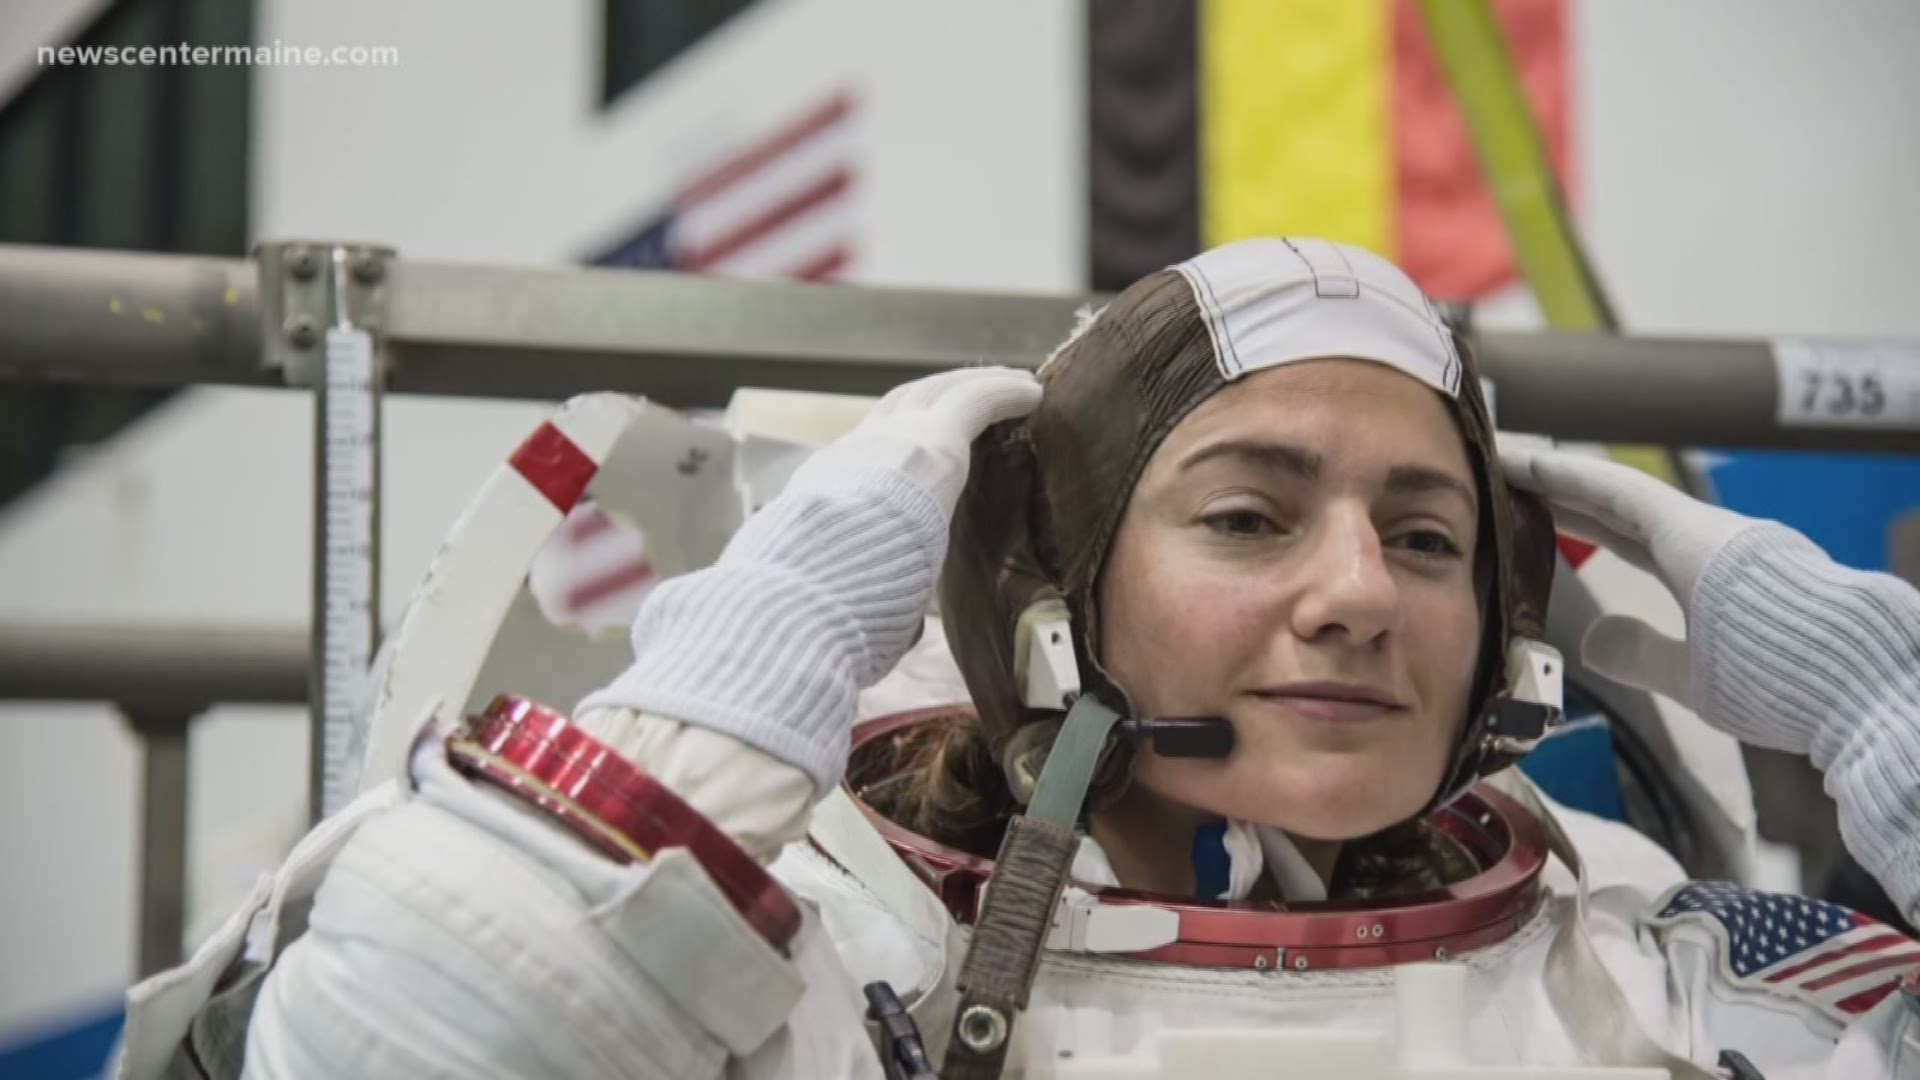 A female scientist turned astronaut from Caribou is headed to the International Space Station later this year.